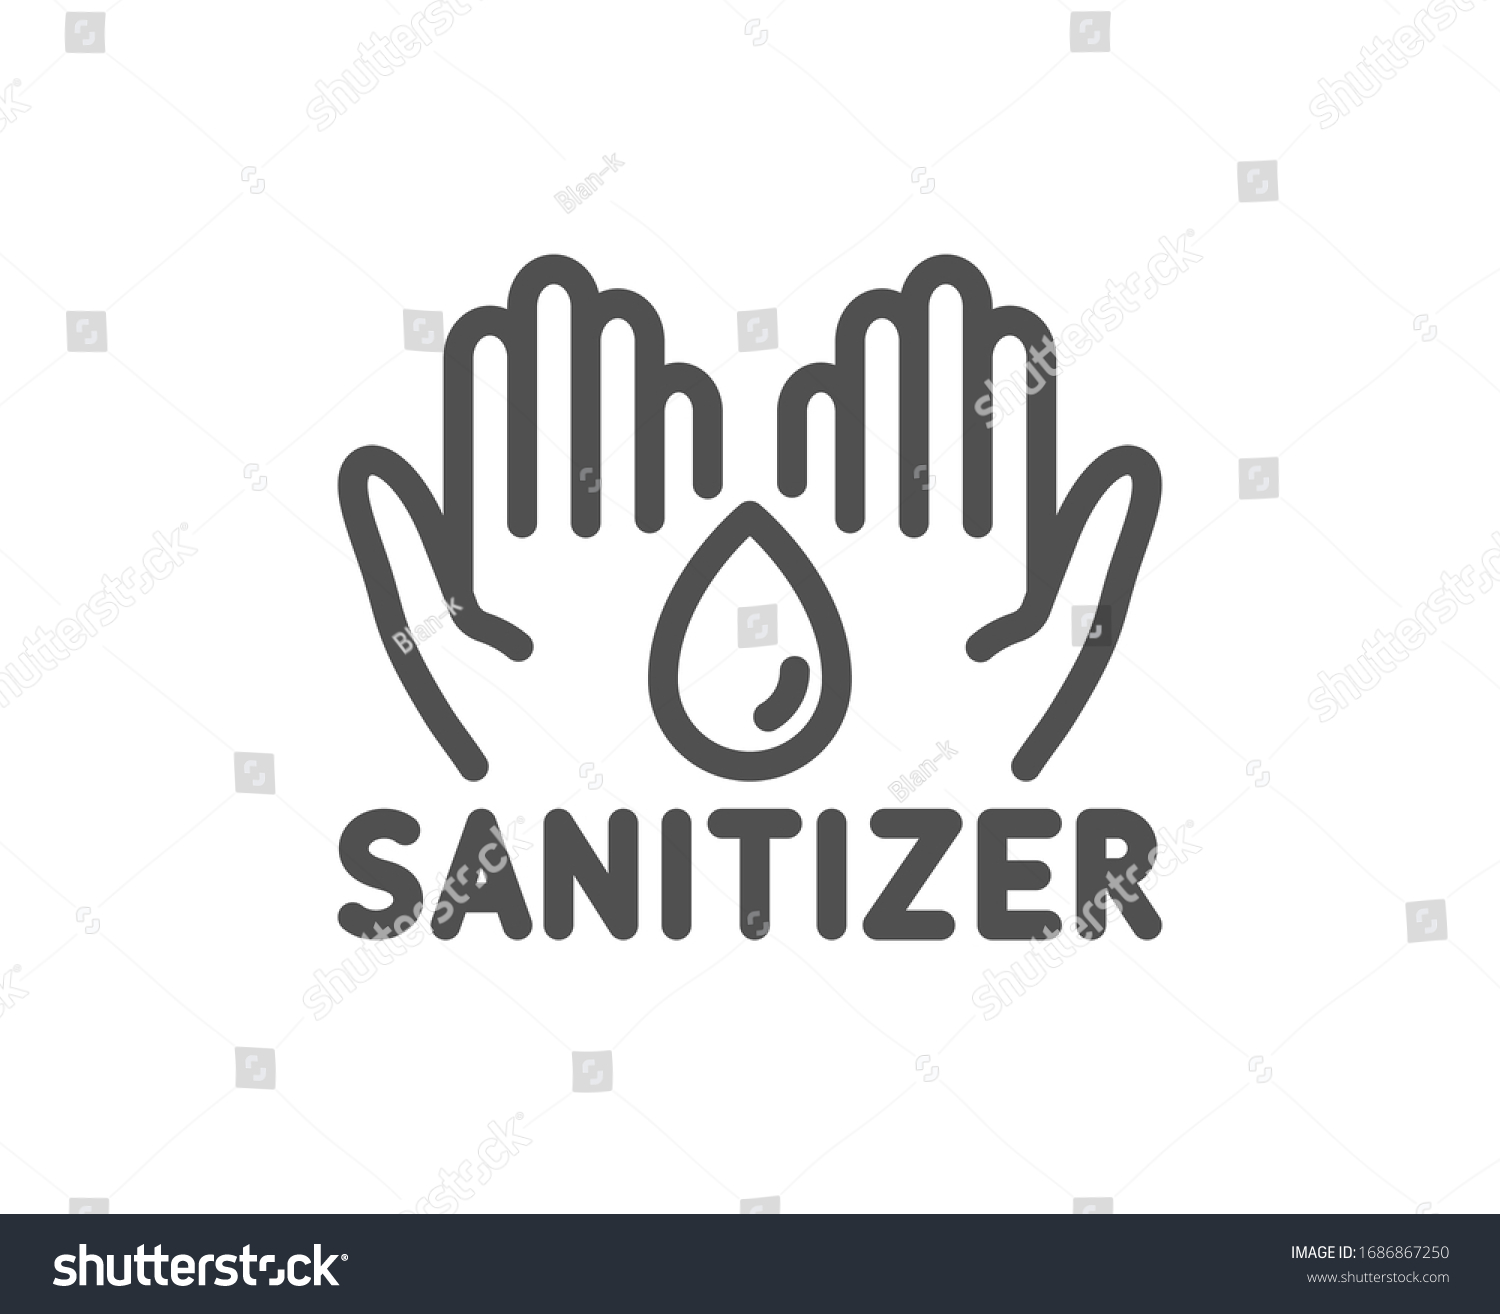 Hand sanitizer line icon. Sanitary cleaning sign. Washing hands symbol. Quality design element. Editable stroke. Linear style hand sanitizer icon. Vector #1686867250